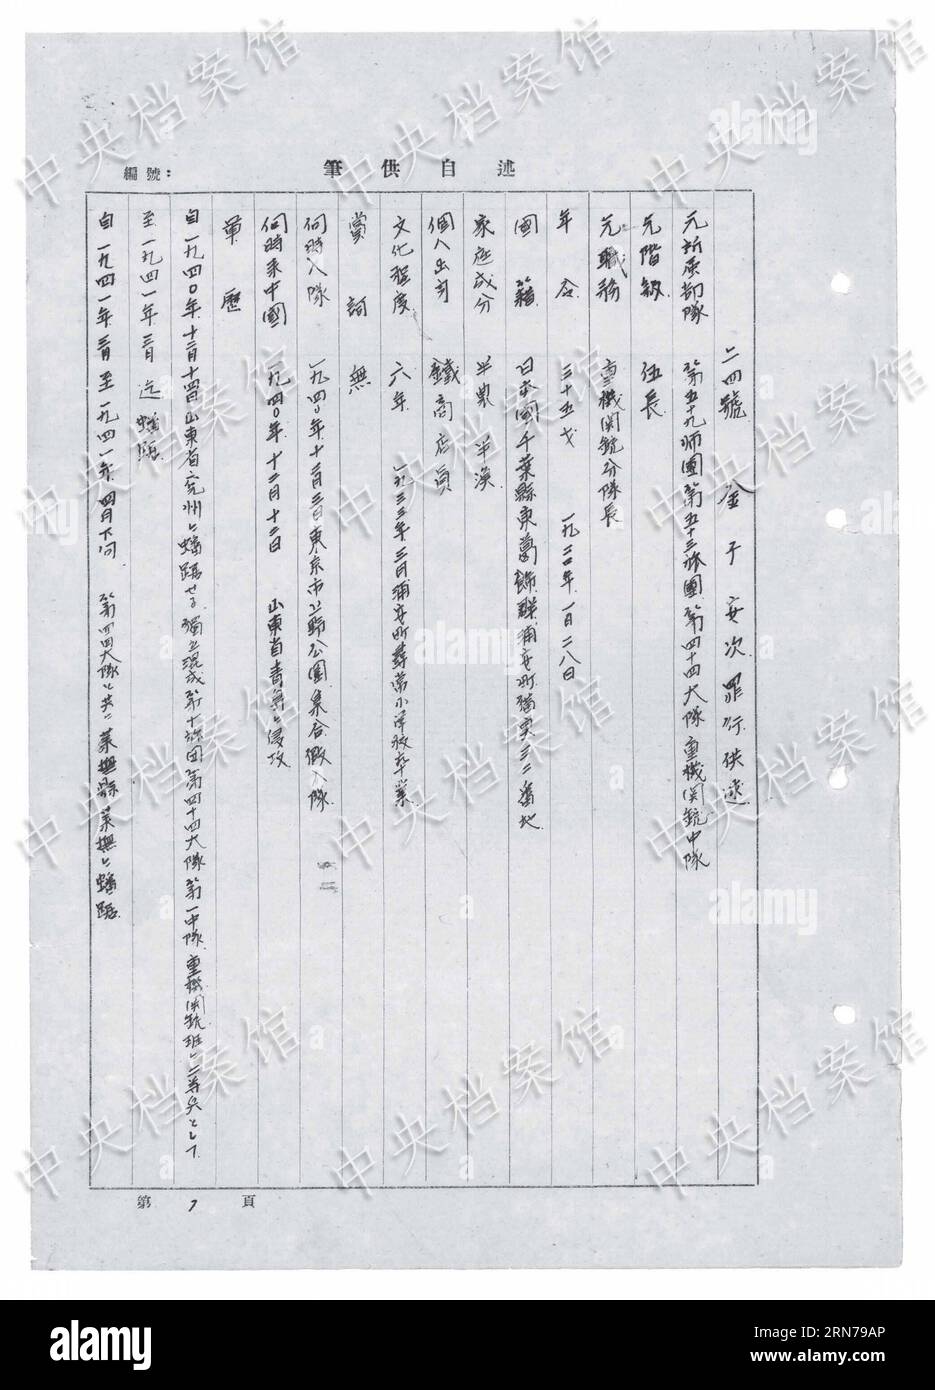 (150827) -- BEIJING, Aug. 27, 2015 () -- Photo released on Aug. 27, 2015 by the State Archives Administration of China on its website shows an excerpt from Japanese war criminal Yasuji Kaneko s handwritten confession. The seventeenth in a series of 31 handwritten confessions from Japanese war criminals published online, the confession features Yasuji Kaneko, who was born in 1920. He joined the Japanese War of Aggression against China in 1940, and was captured in August 1945. Kaneko and his companions arrested two Chinese peasants in Laiwu County of Shandong Province, tied their hands behind th Stock Photo